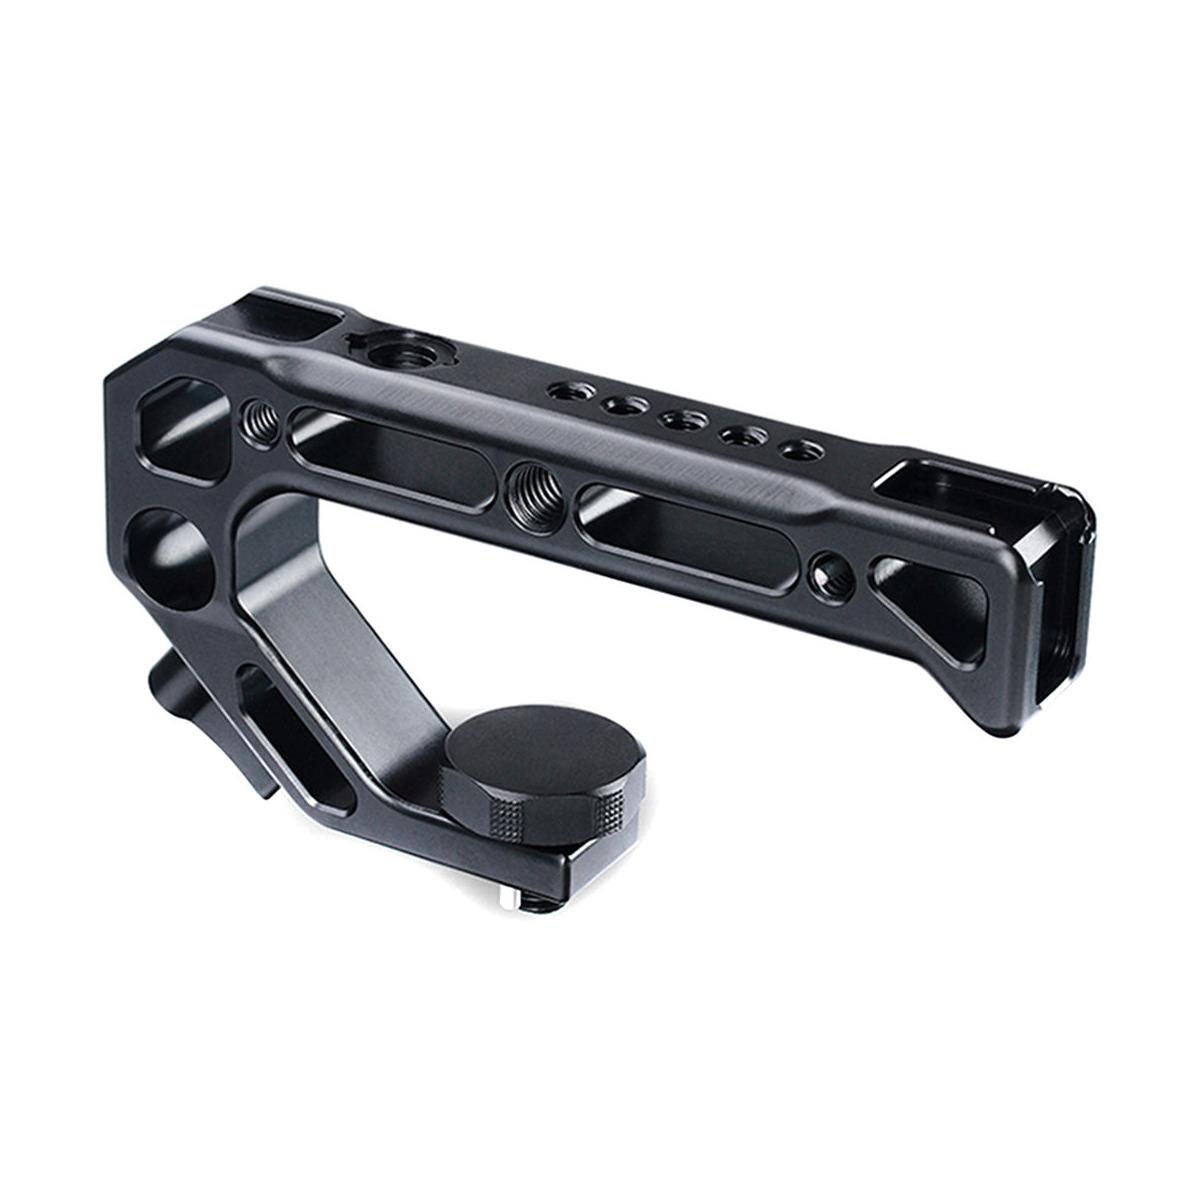 Image of Ulanzi R008 Cold Shoe Top handle for Camera Cages